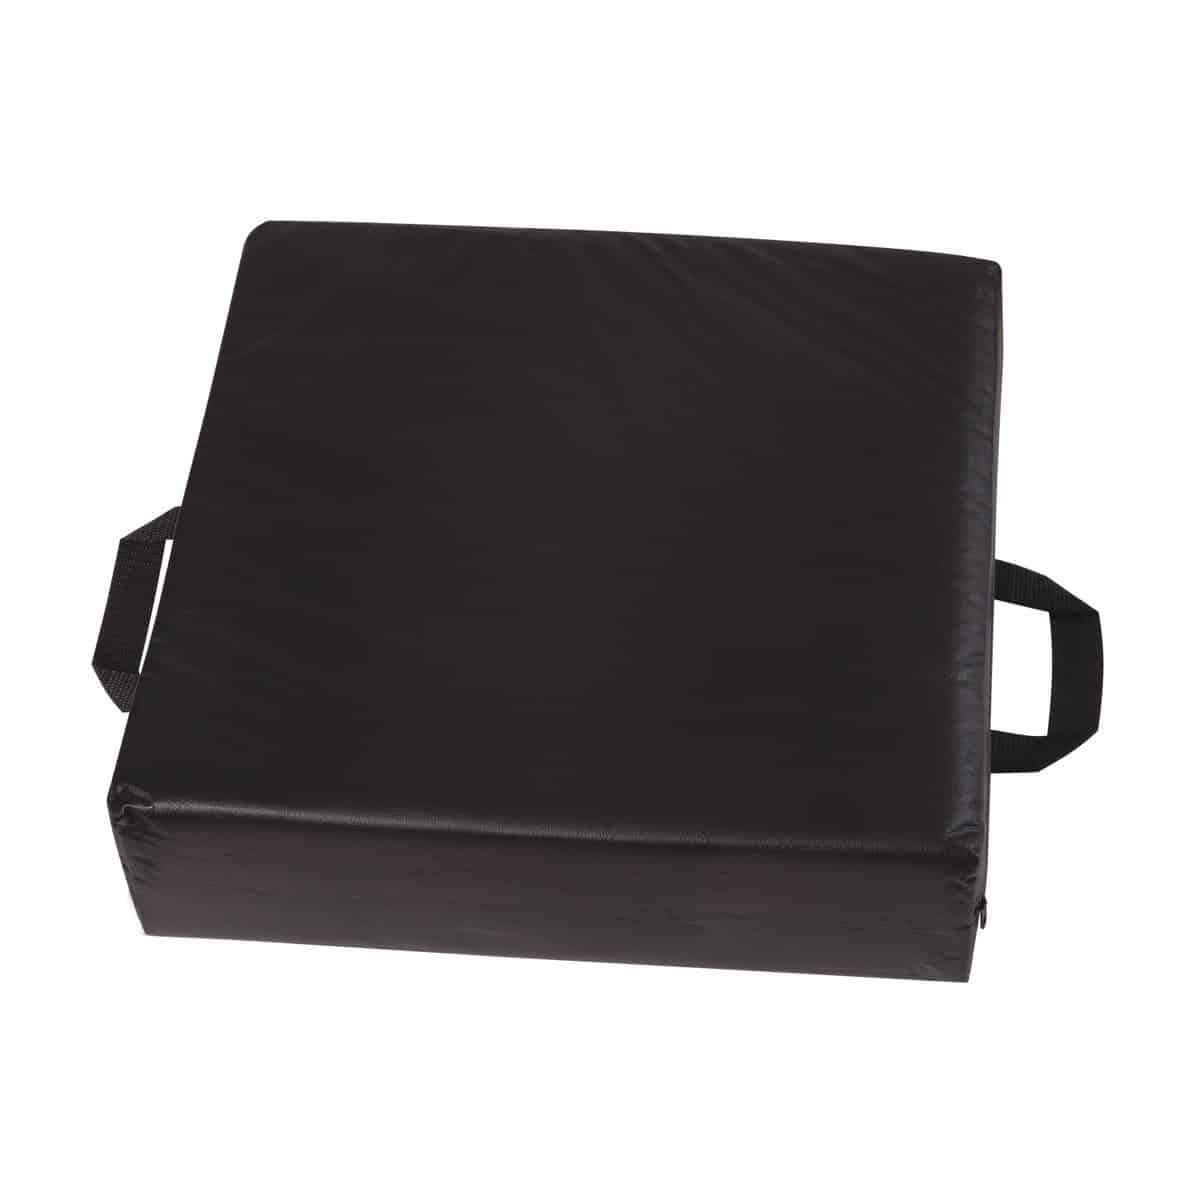 DMI Deluxe Seat Lift Seat Riser Car Cushion Pillow with Black Cover at